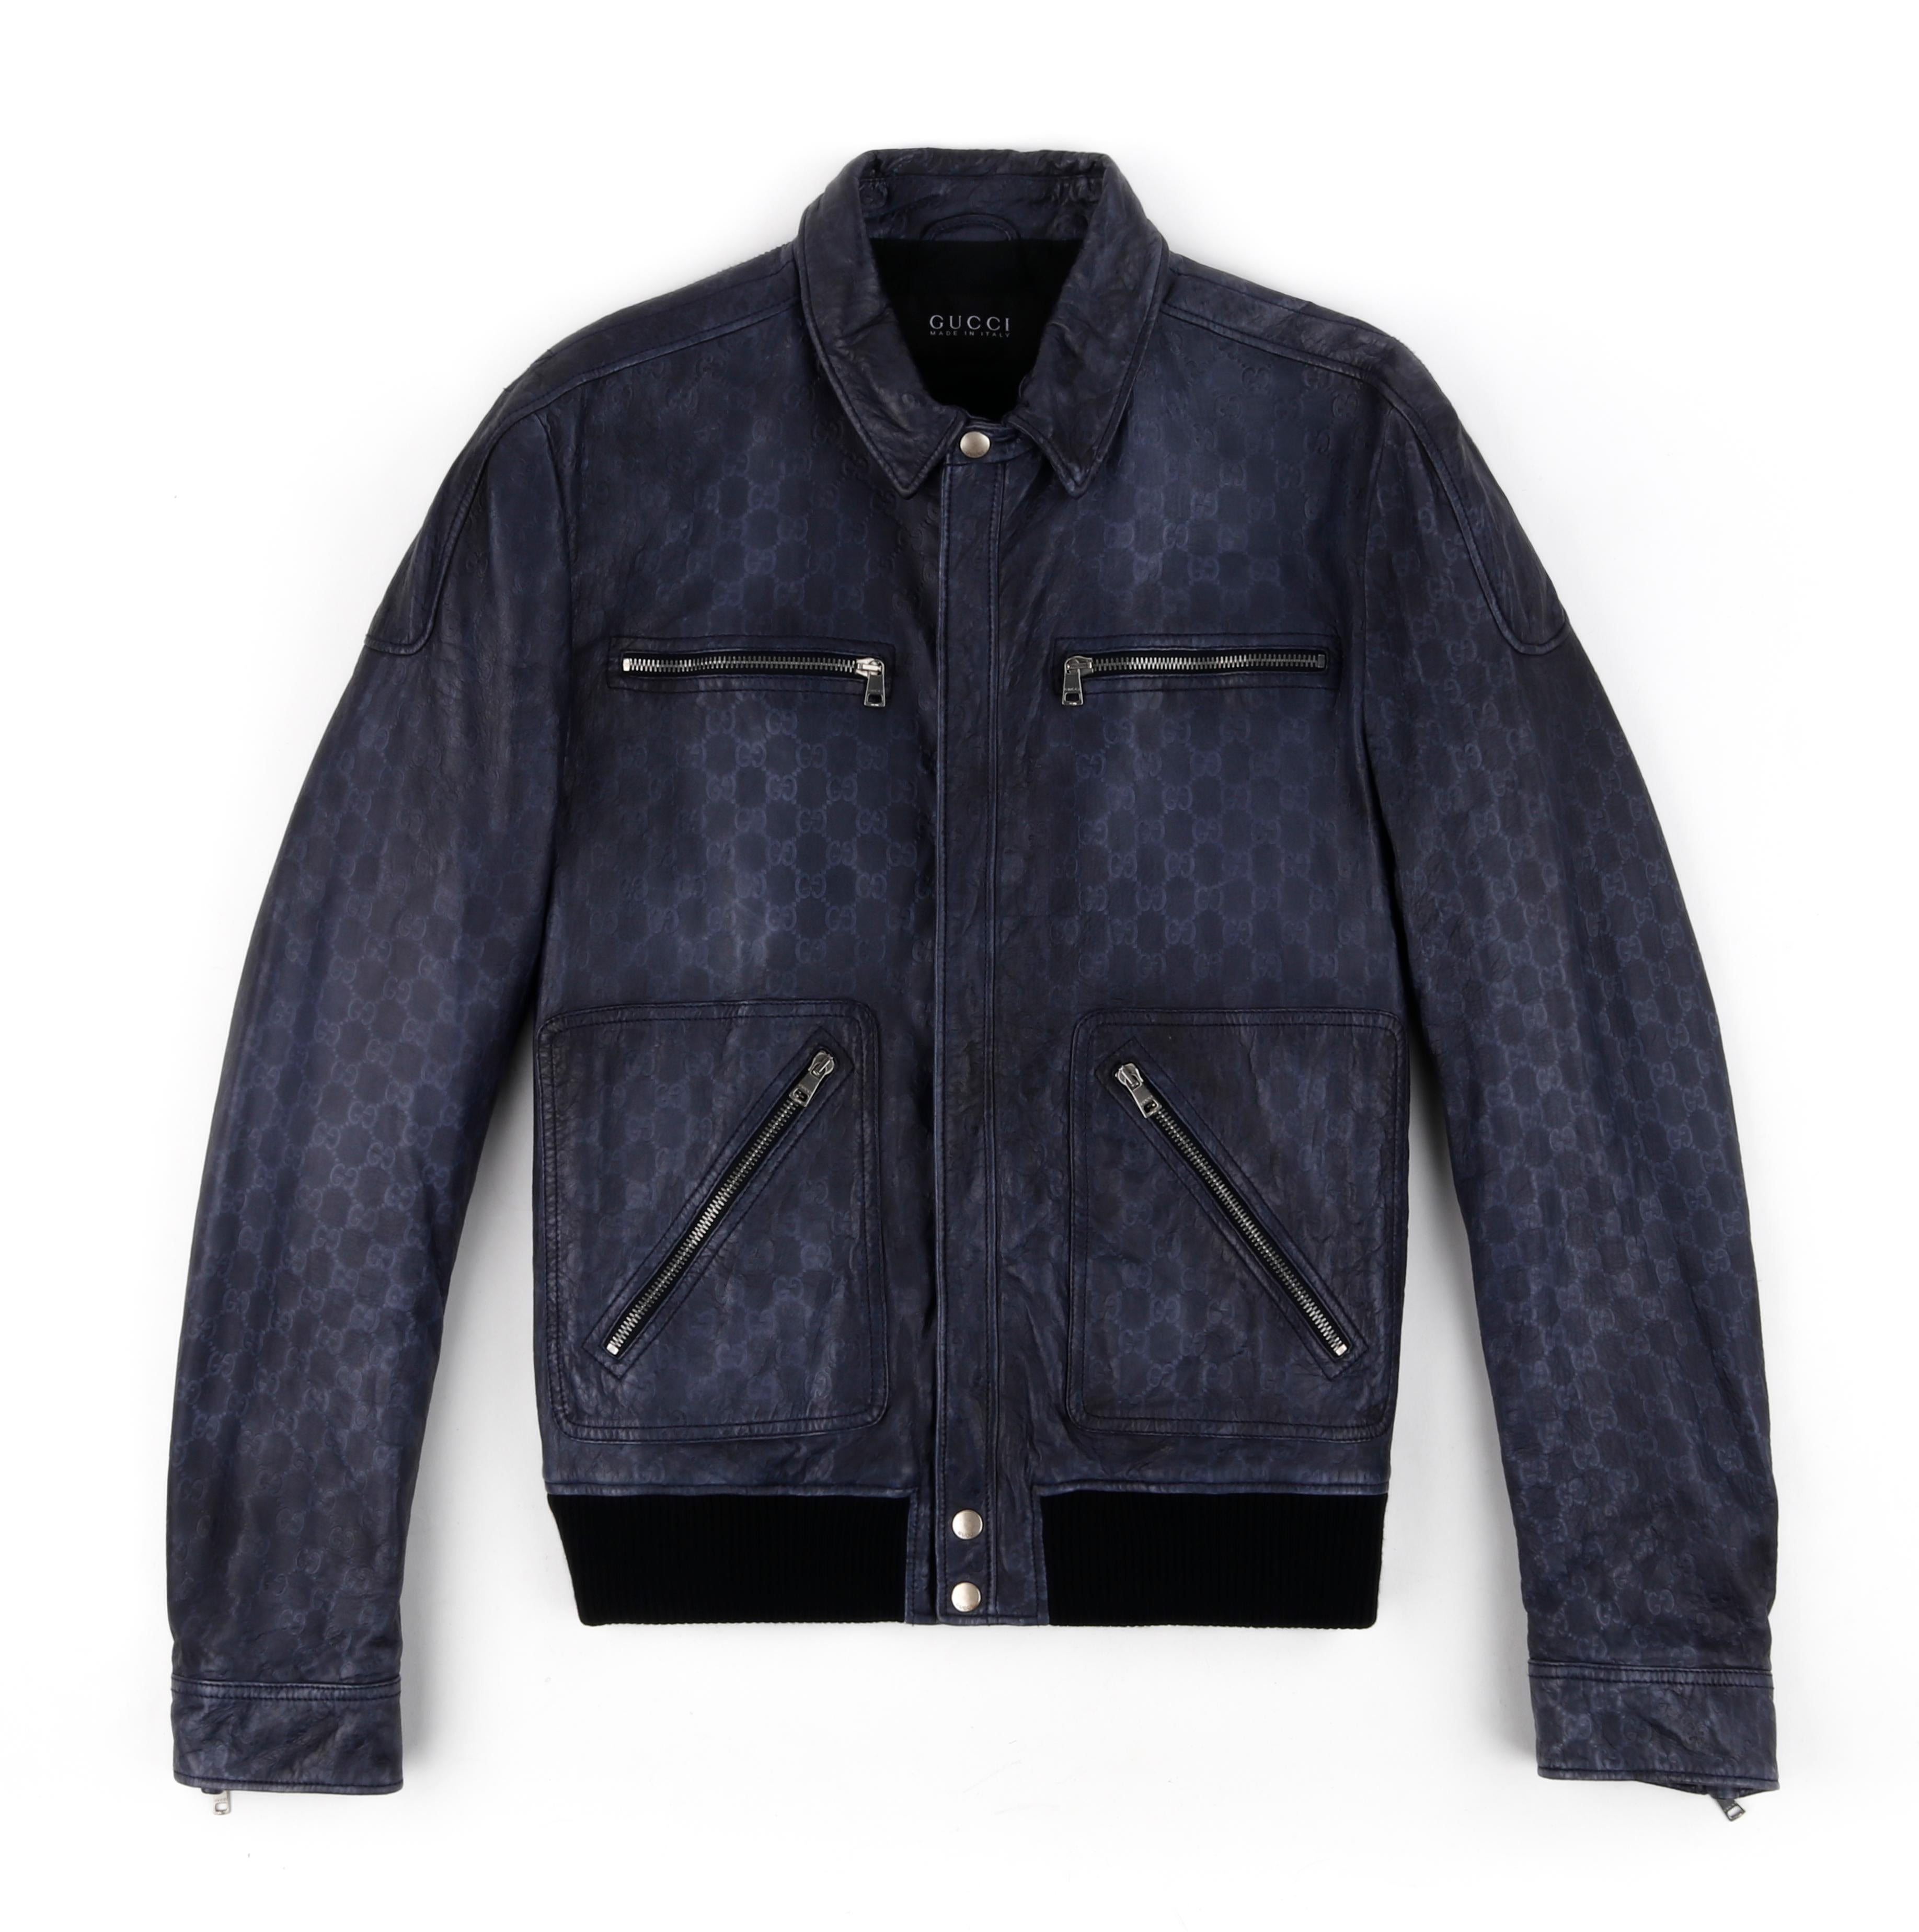 GUCCI Alessandro Michele GG Guccissima Blue Sprayed Leather Embossed Bomber Jacket / Coat
 
Estimated Retail: $3,150
 
Brand / Manufacturer: Gucci
Manufacturer Style Name: Bomber Jacket
Color(s): Blue
Lined: Yes
Marked Fabric Content: 100% Genuine